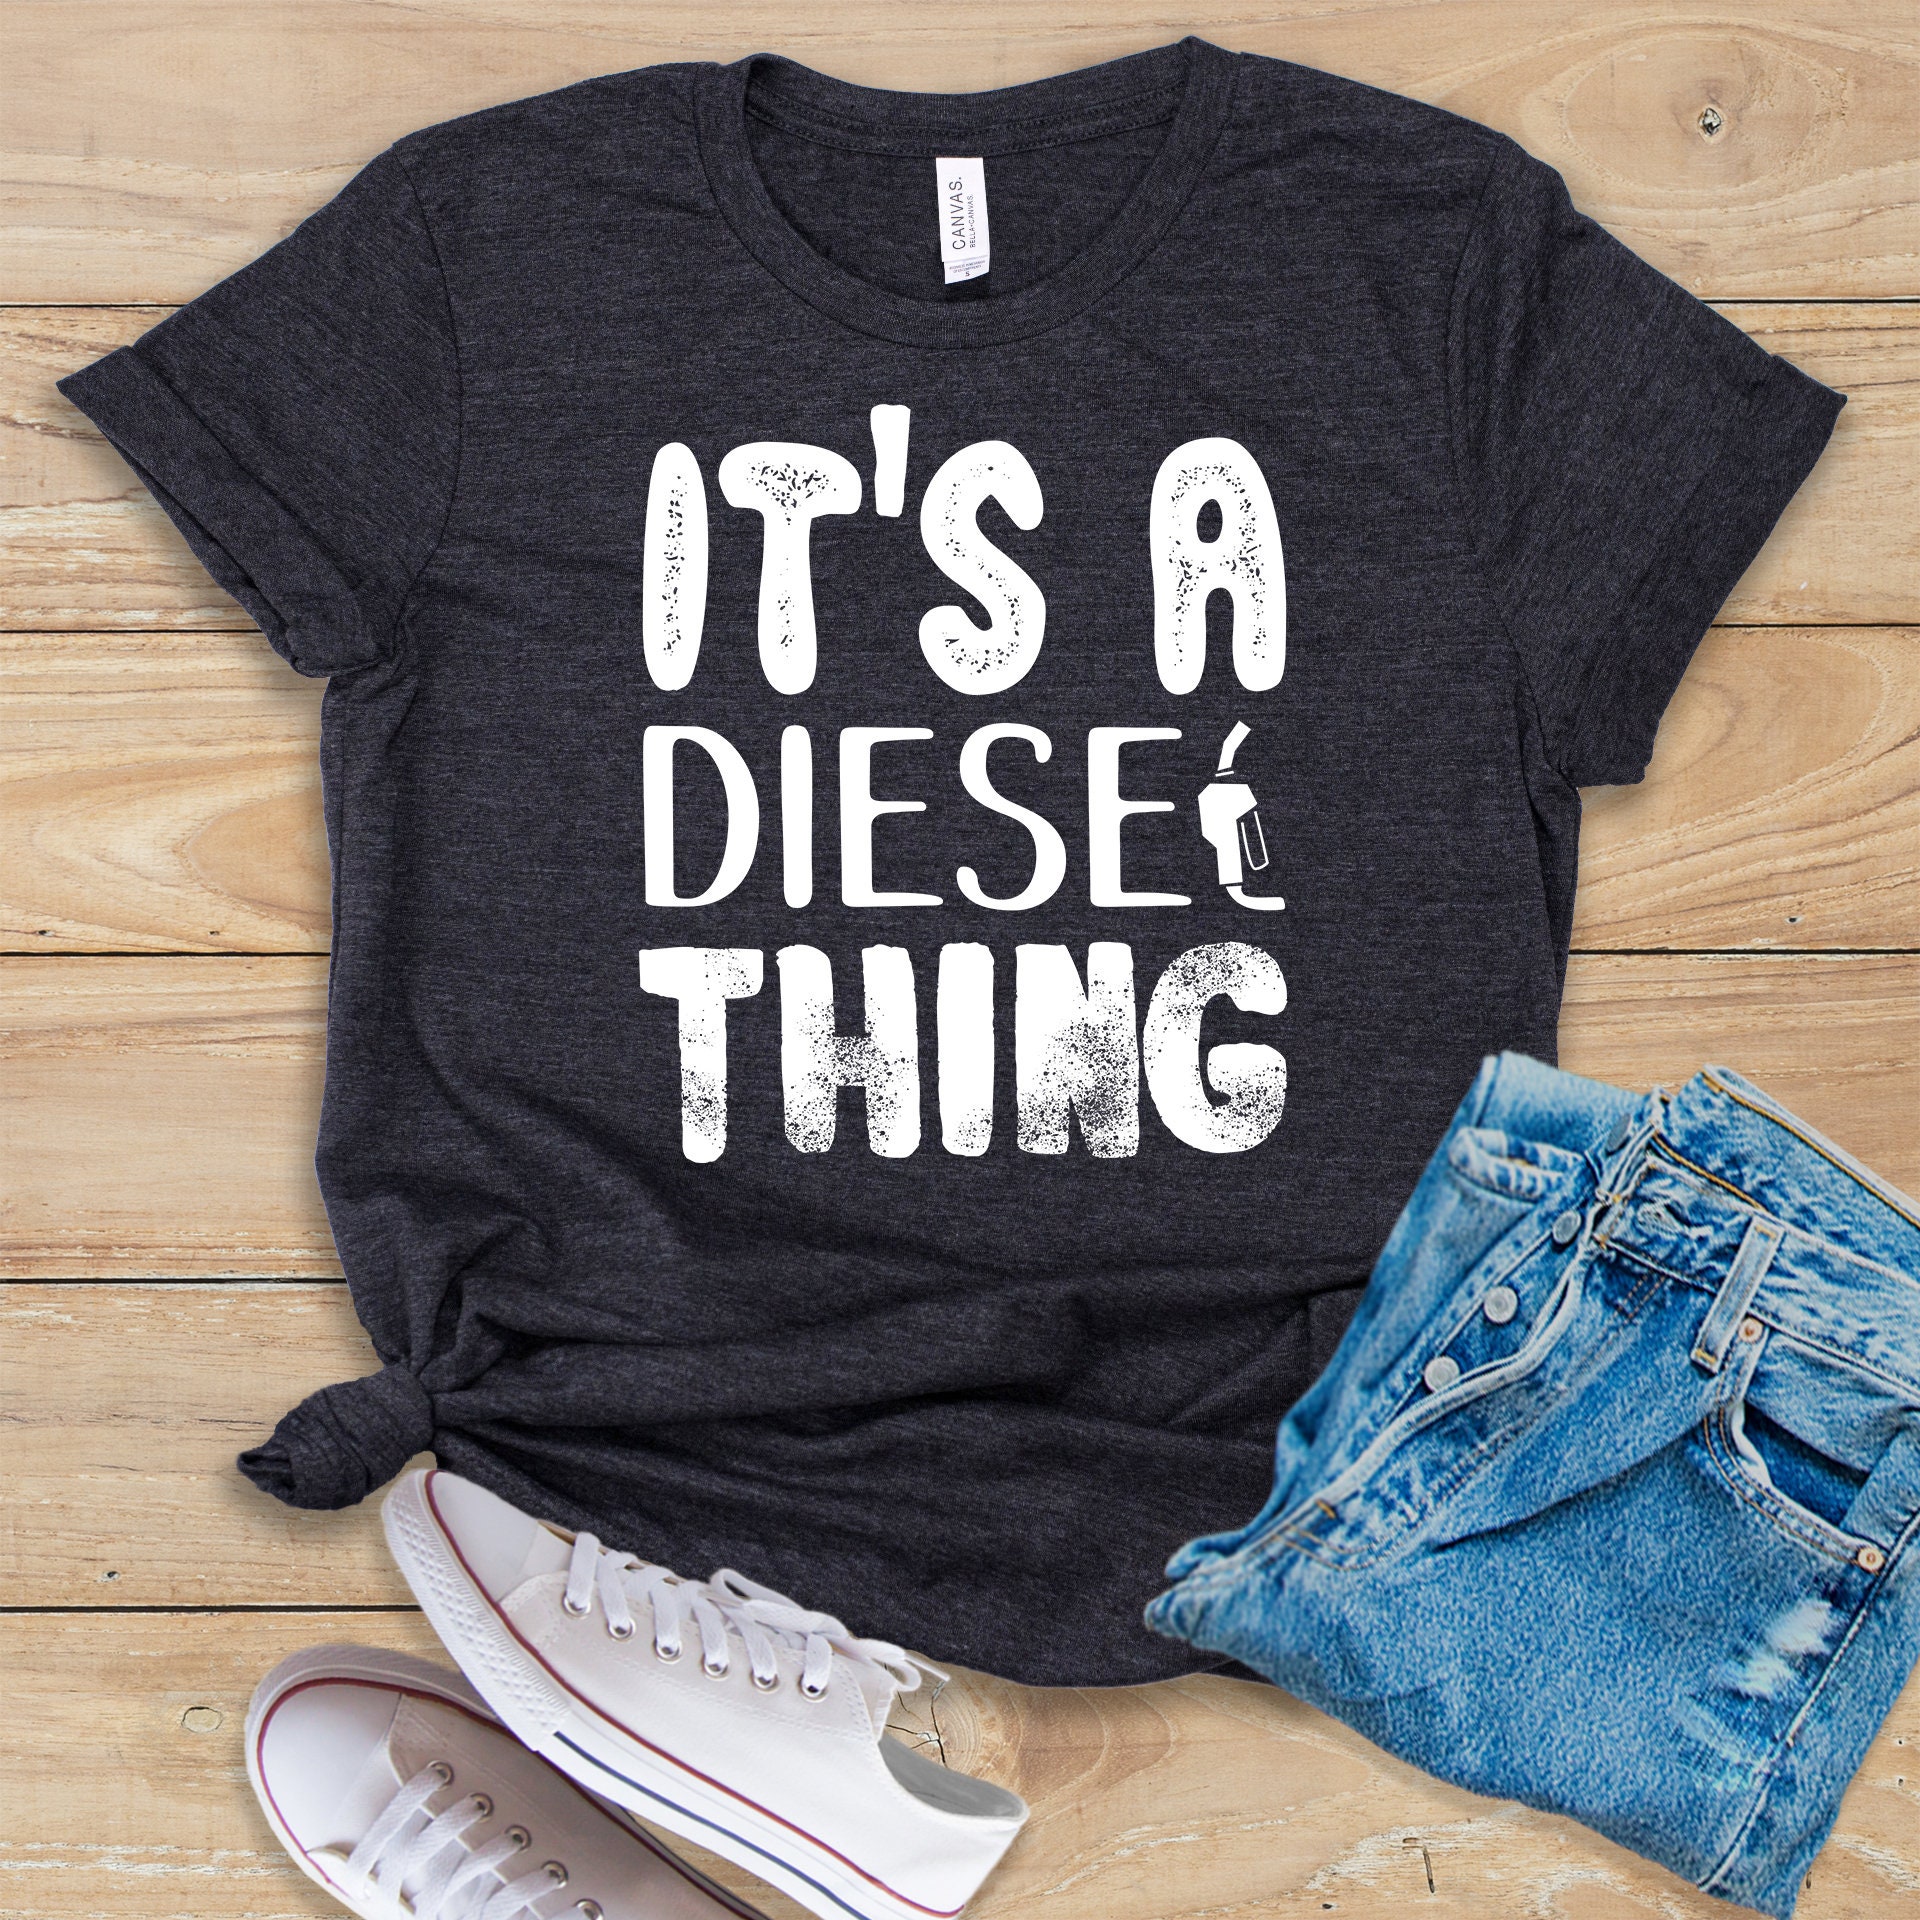 Diesel thing shirt for sale  